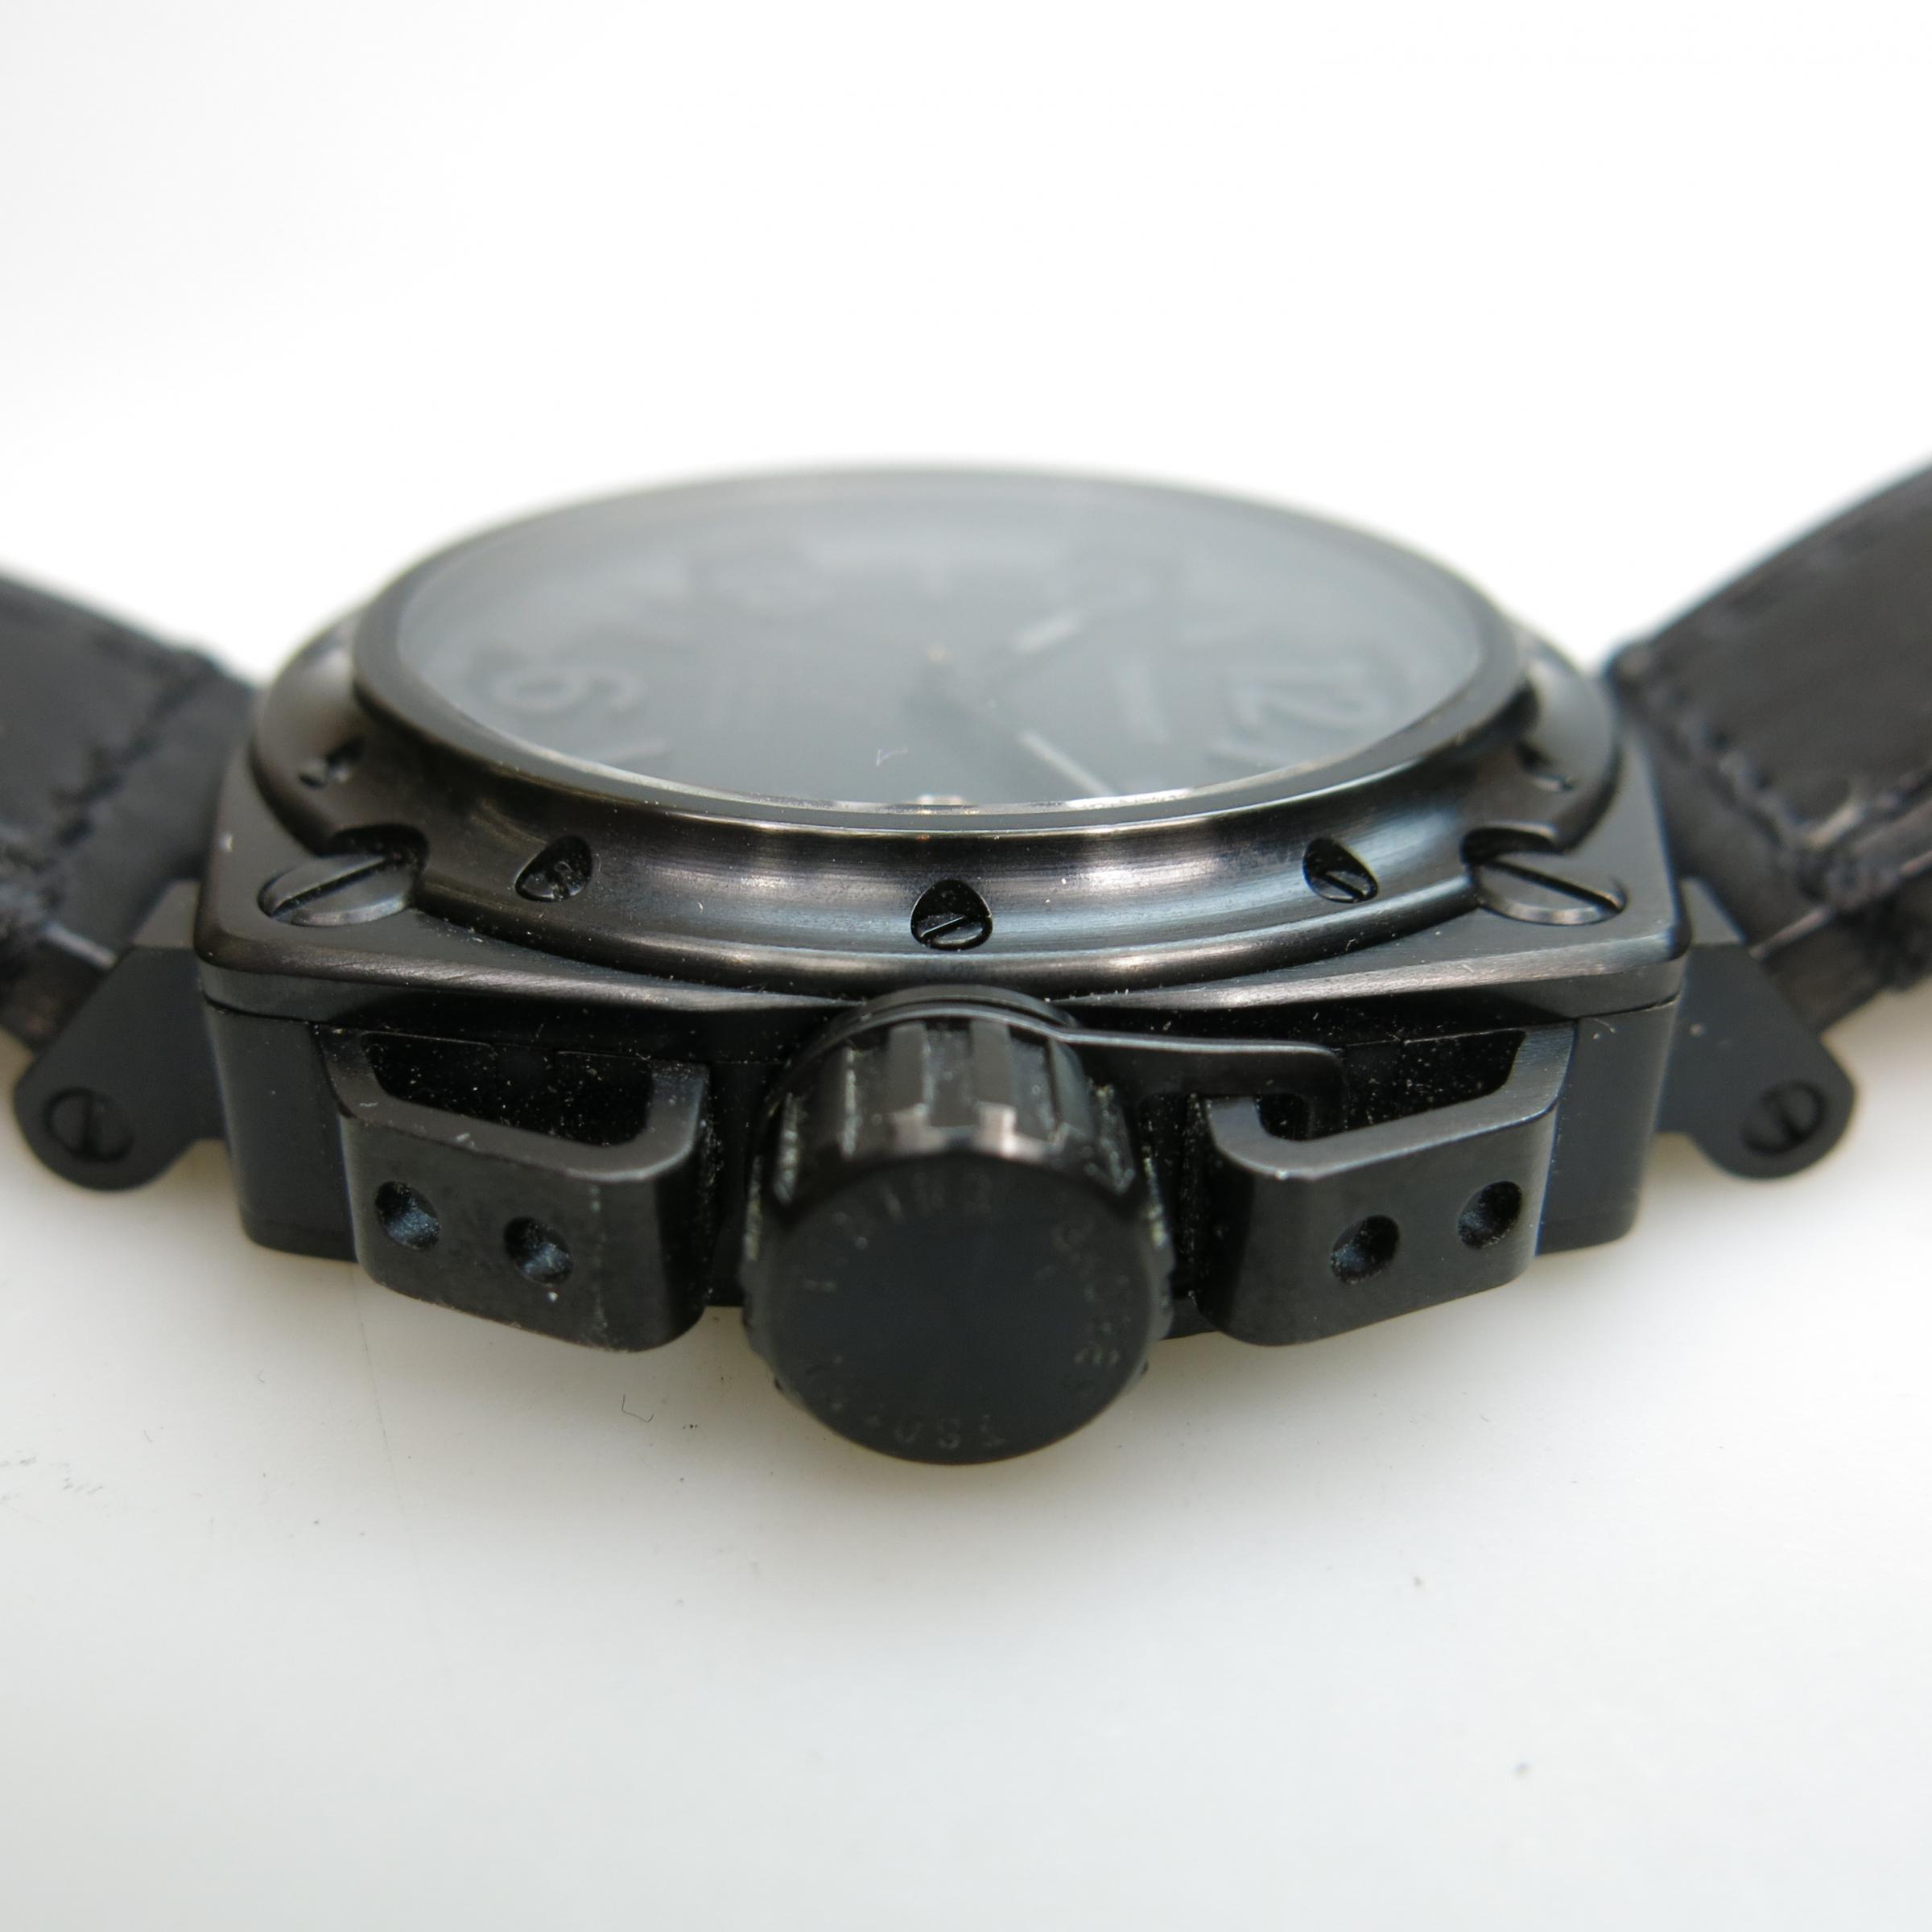 Tsovet 'All-Black' Wristwatch, With Date